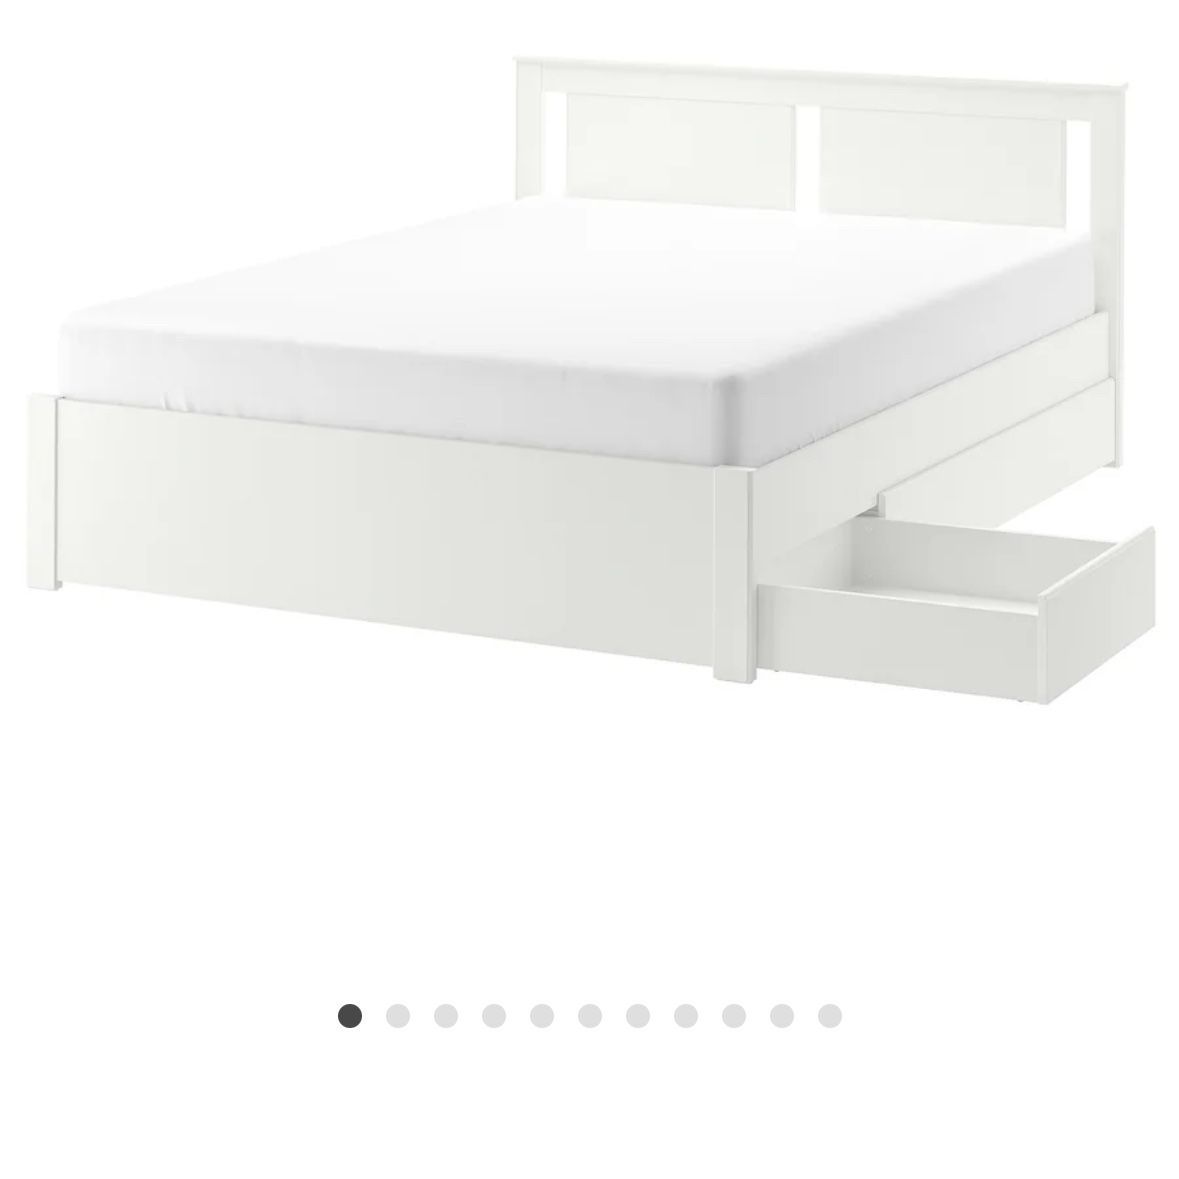 IKEA white bed frame with drawers bed slates and mattress included (optional)  